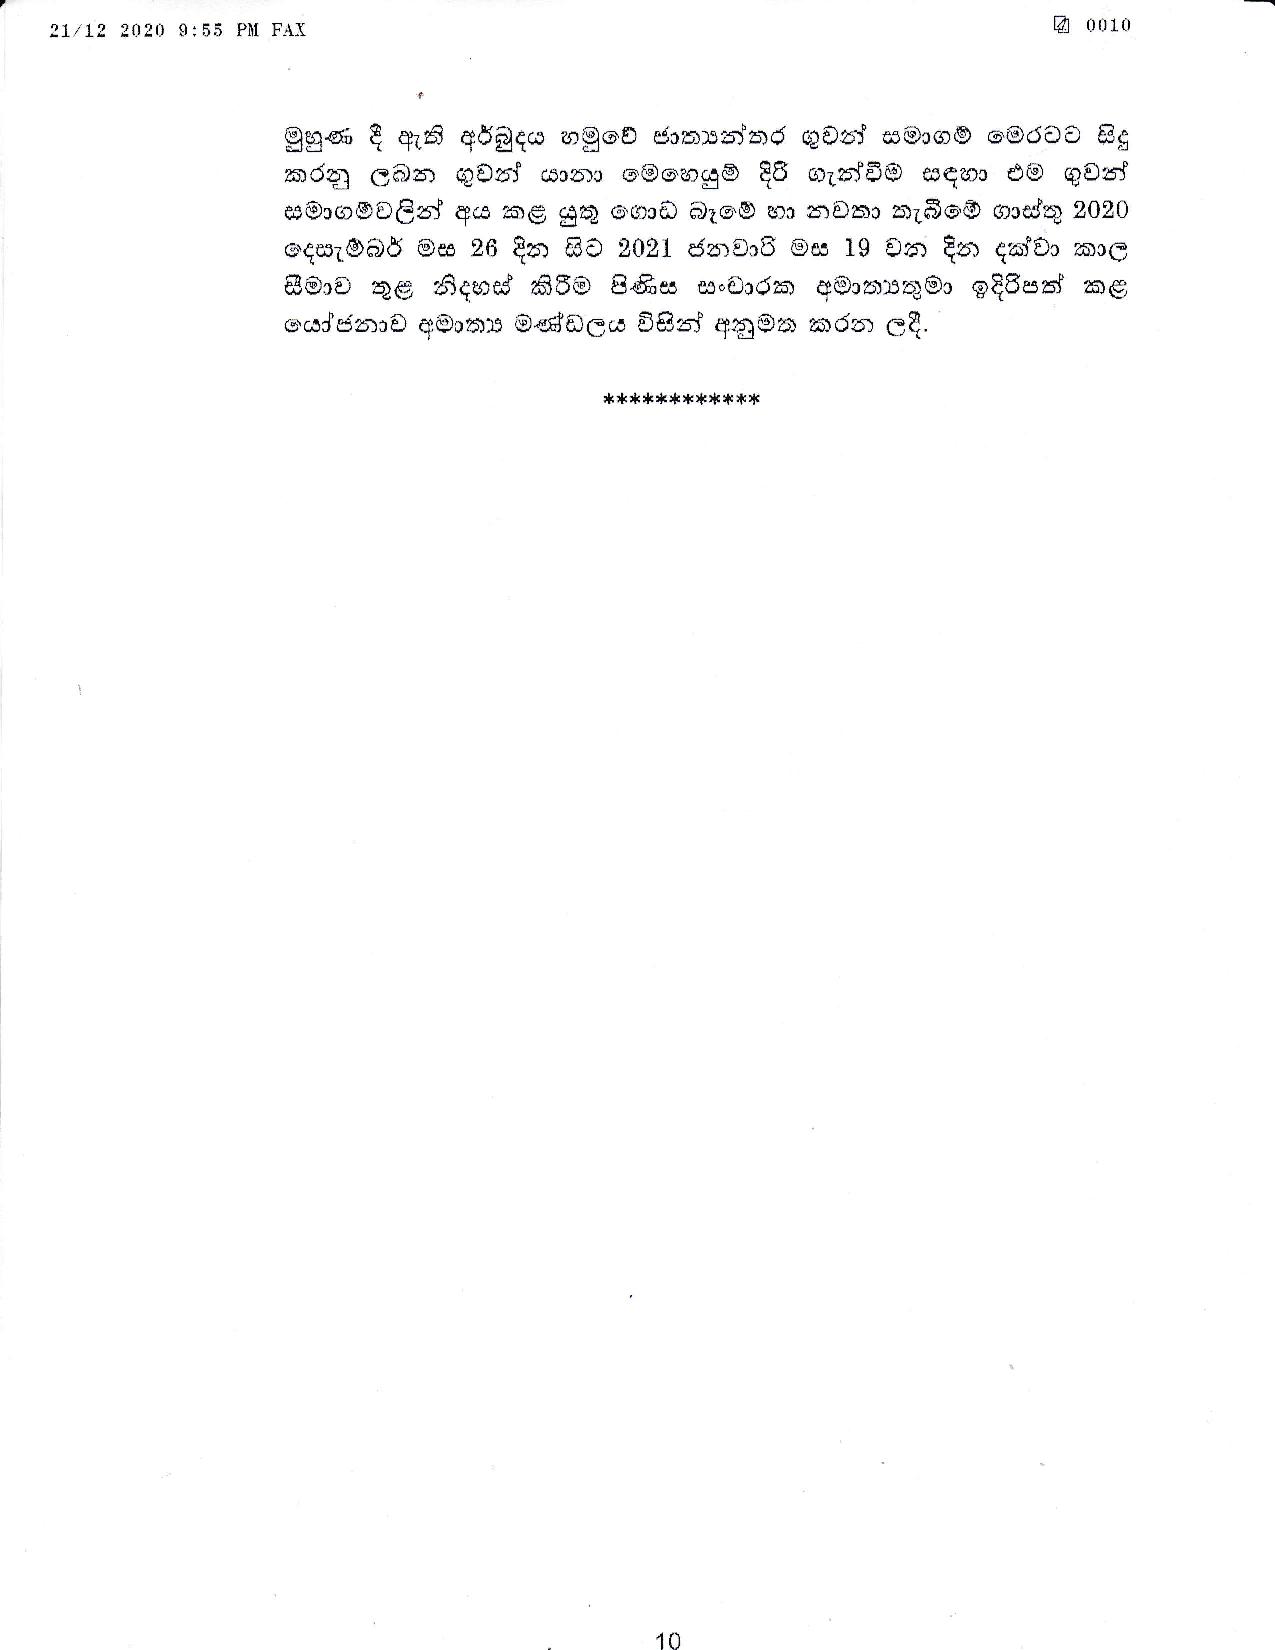 Cabinet Decision on 21.12.2020 page 010